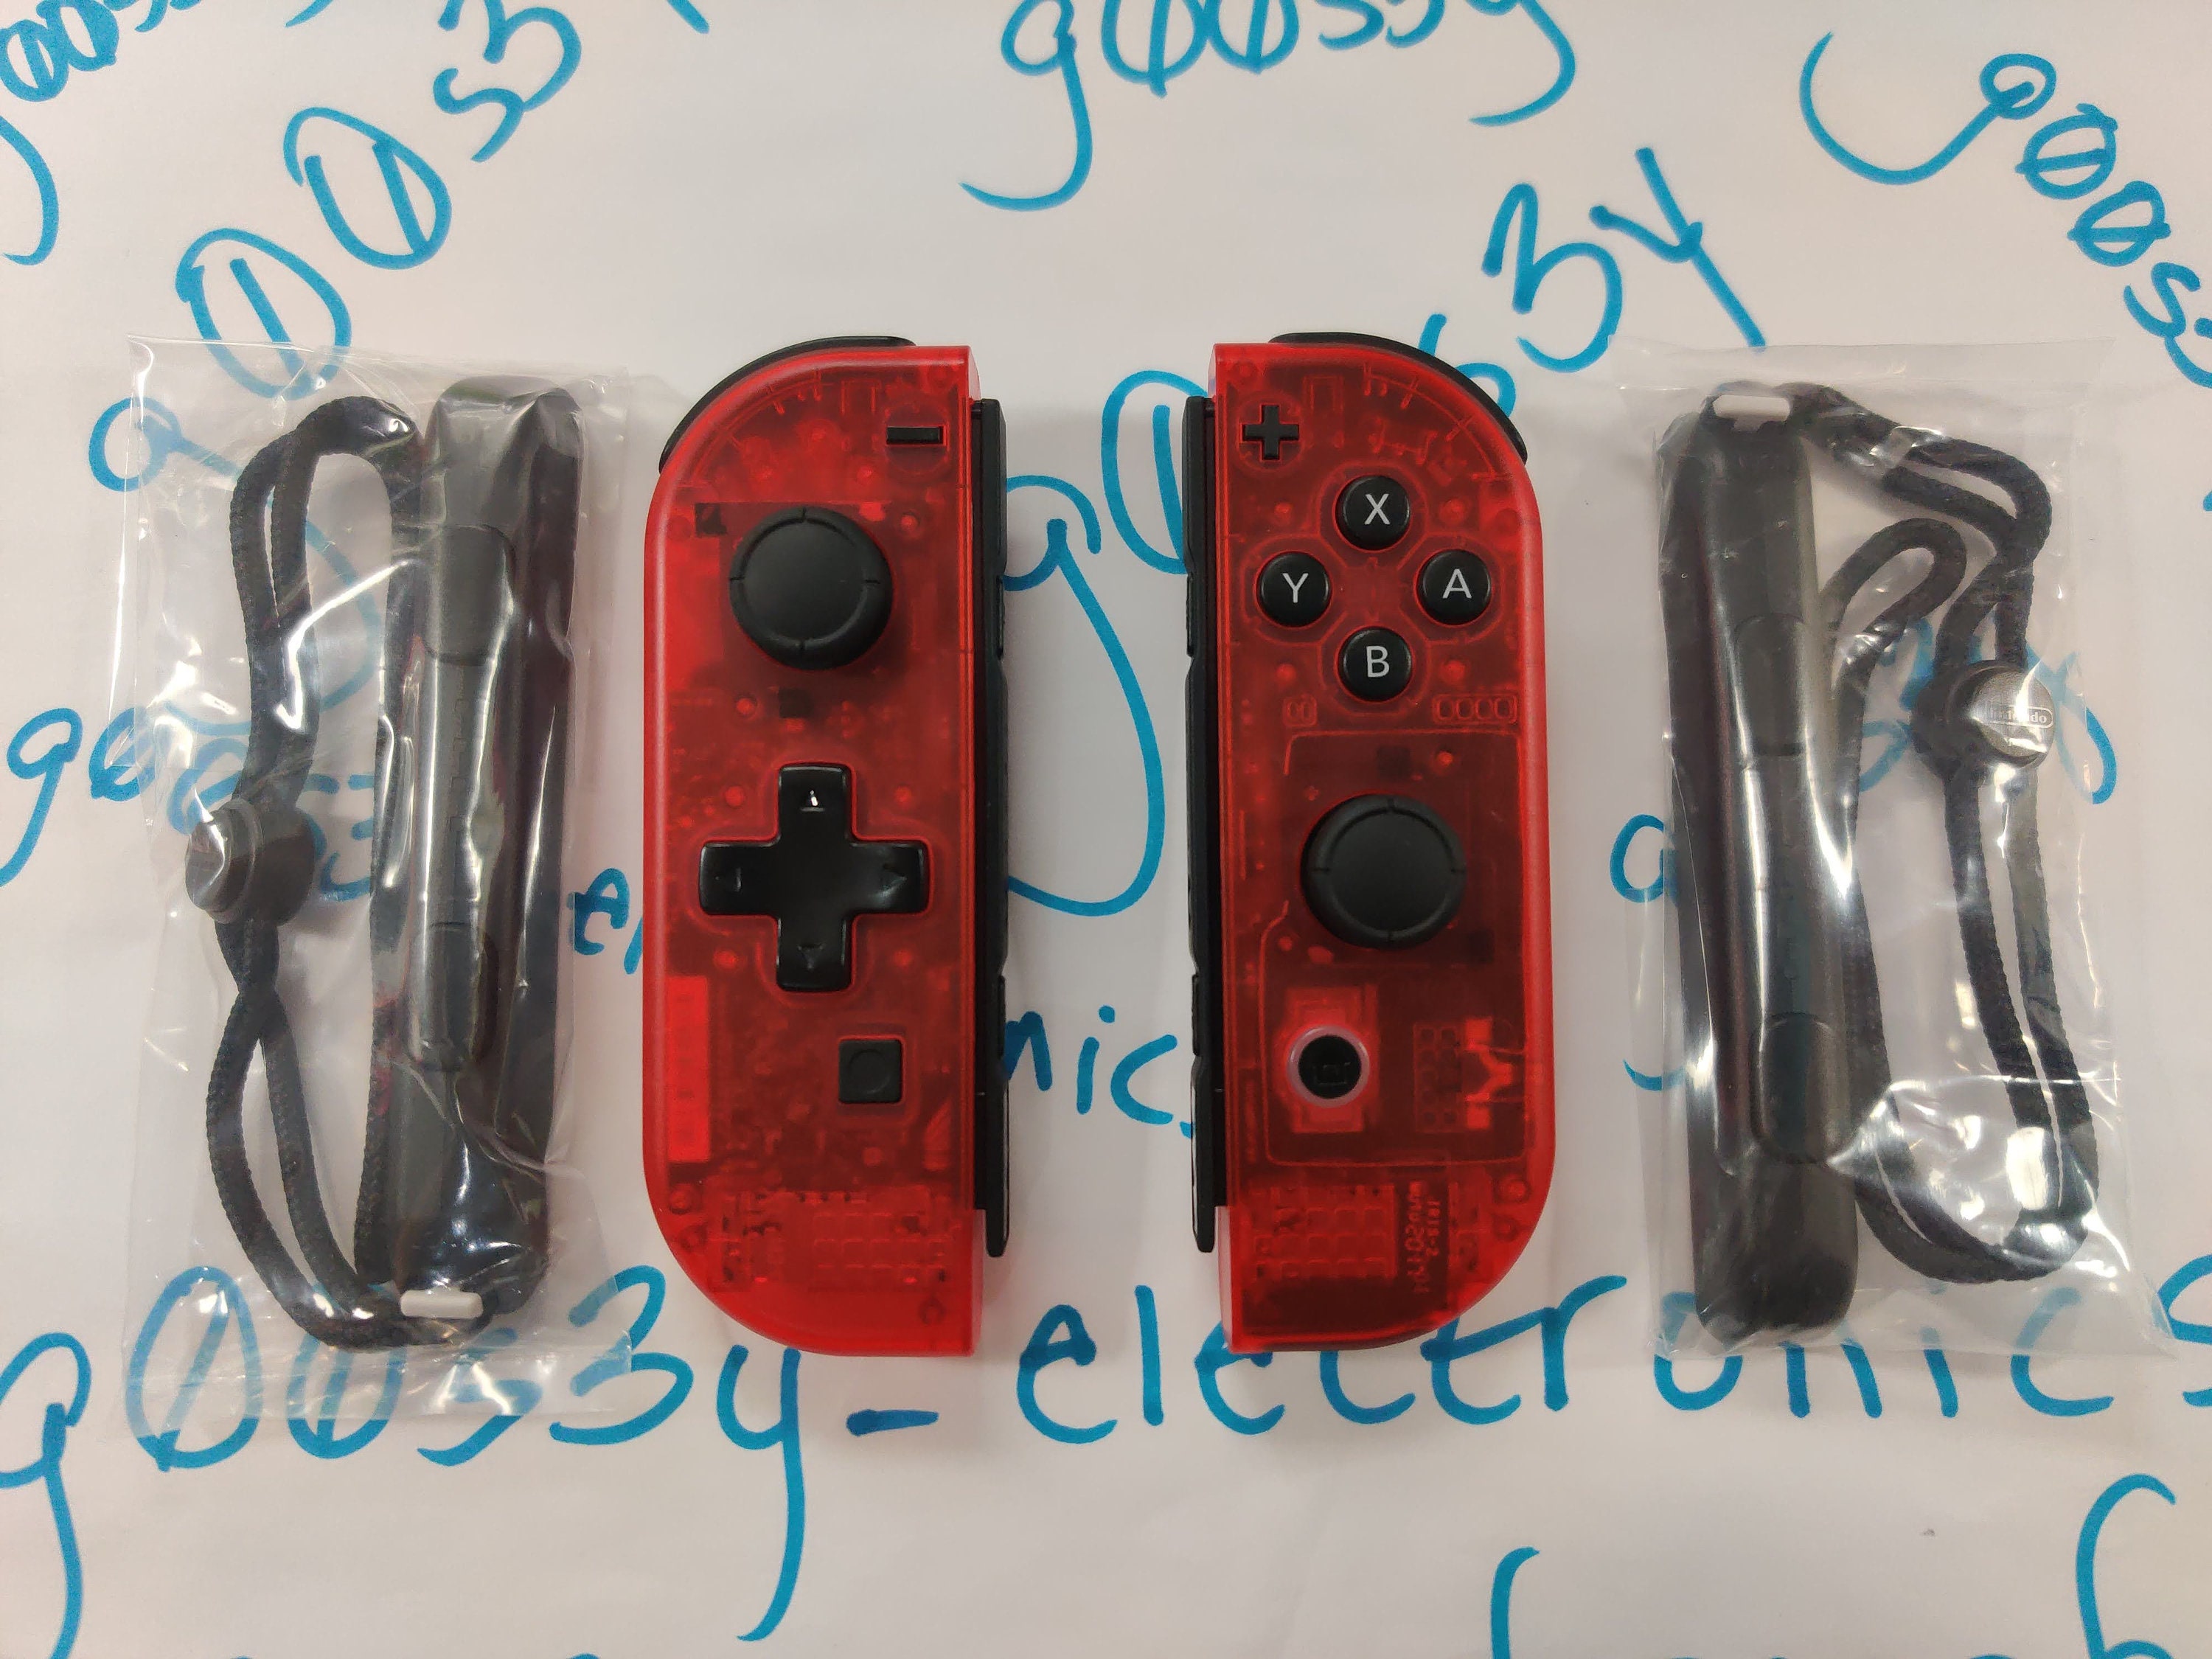 Joy-Con LED Button Kit for Nintendo Switch - Standard Clear